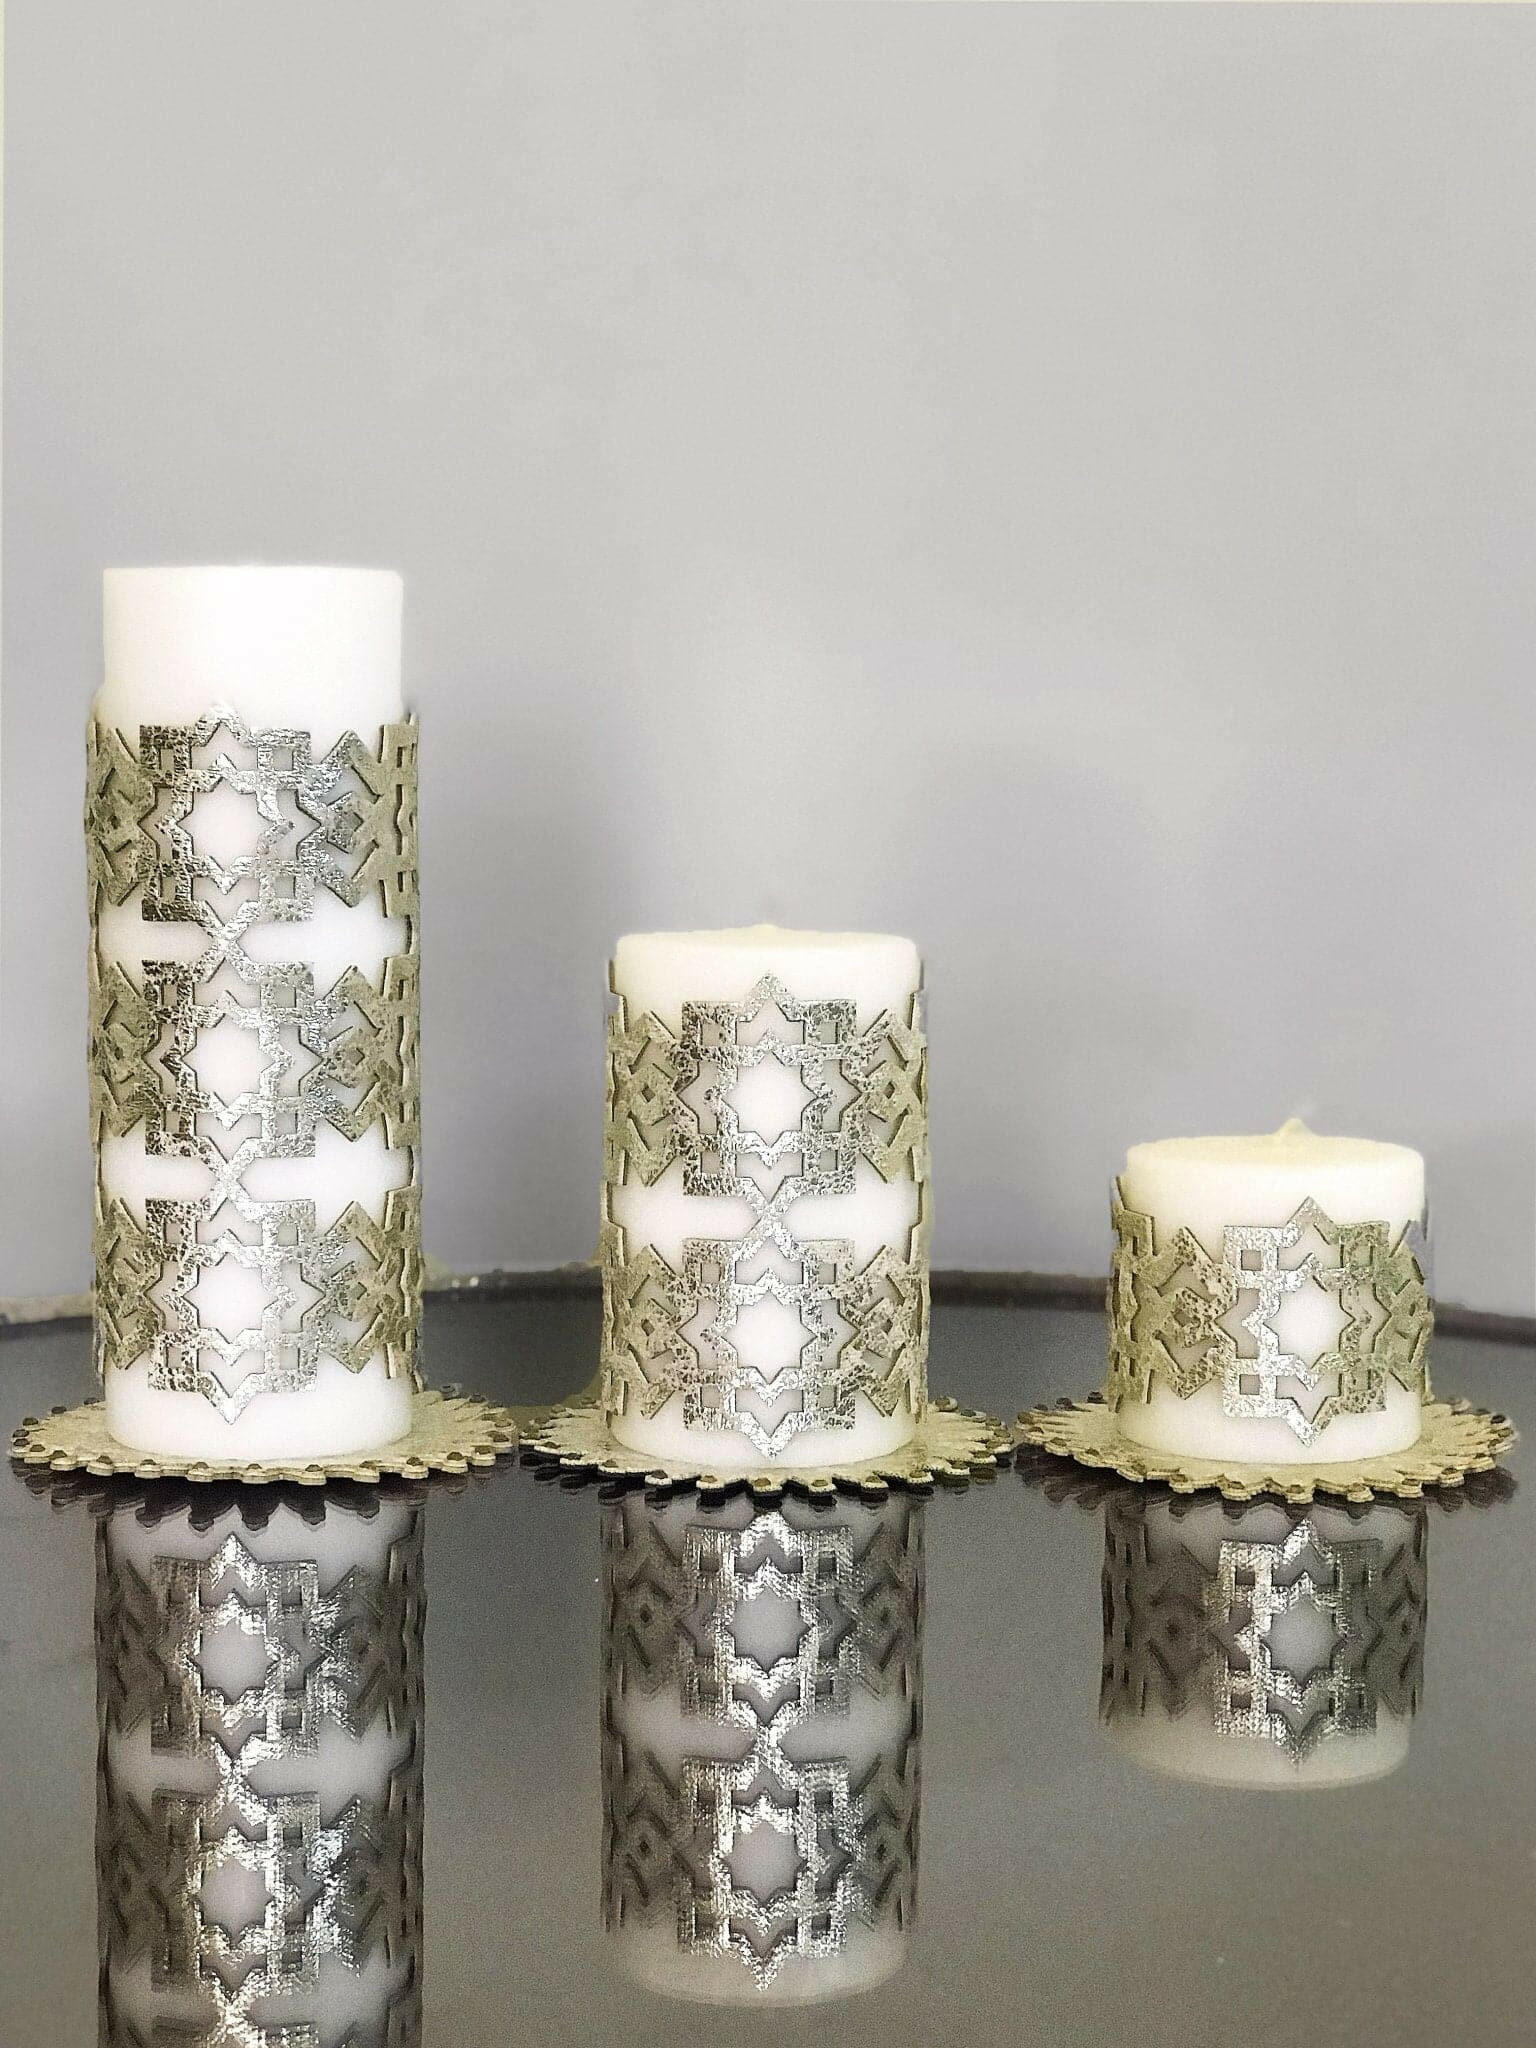 Ottoman Gold Color Candle Set of 3, Leather Geometric Pattern, Decorative Creative Home Designs Candles